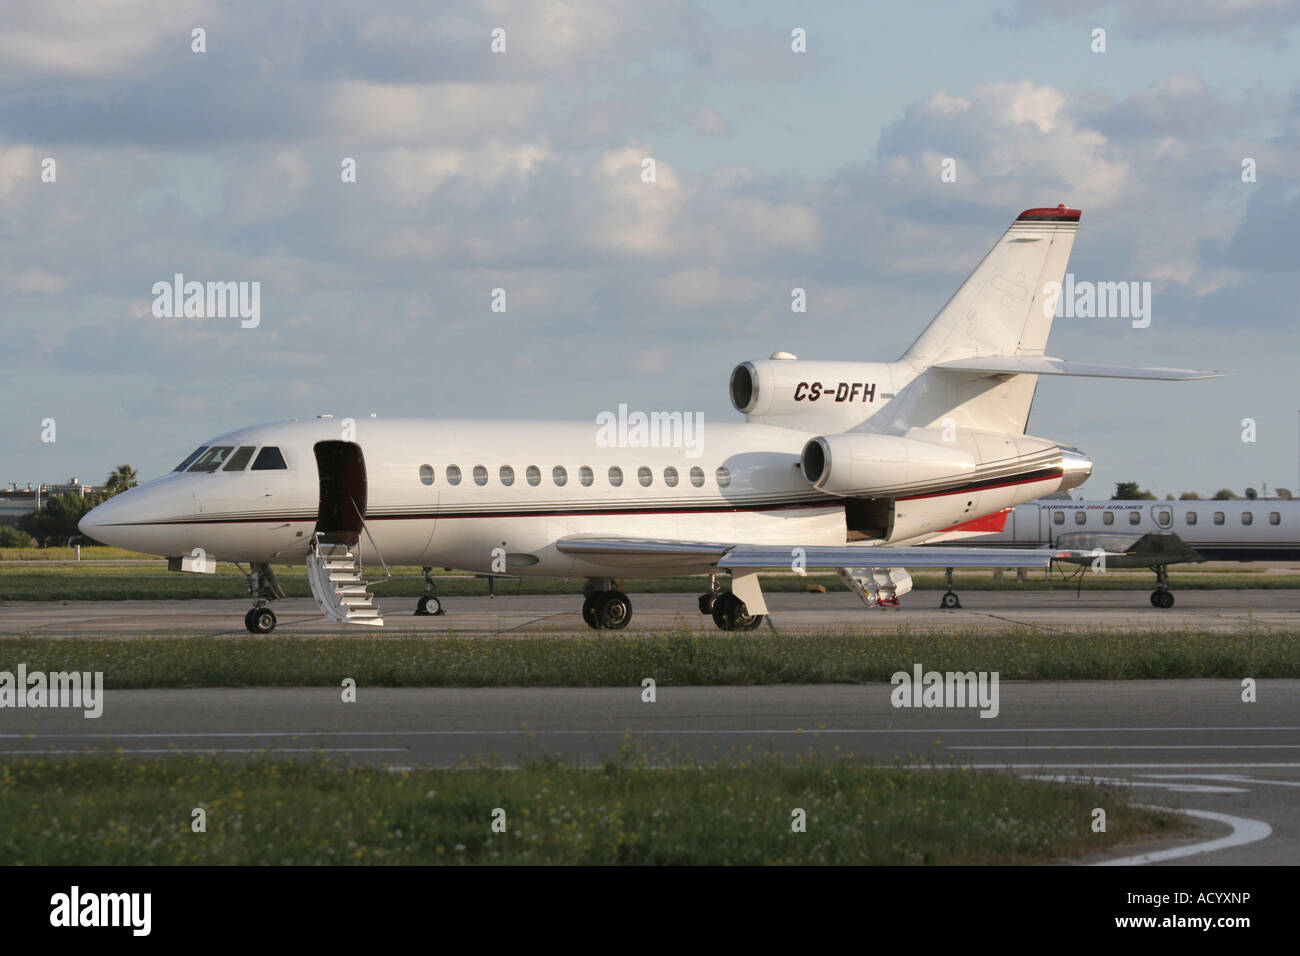 Dassault Falcon 900 private business jet aircraft belonging to NetJets Europe Stock Photo